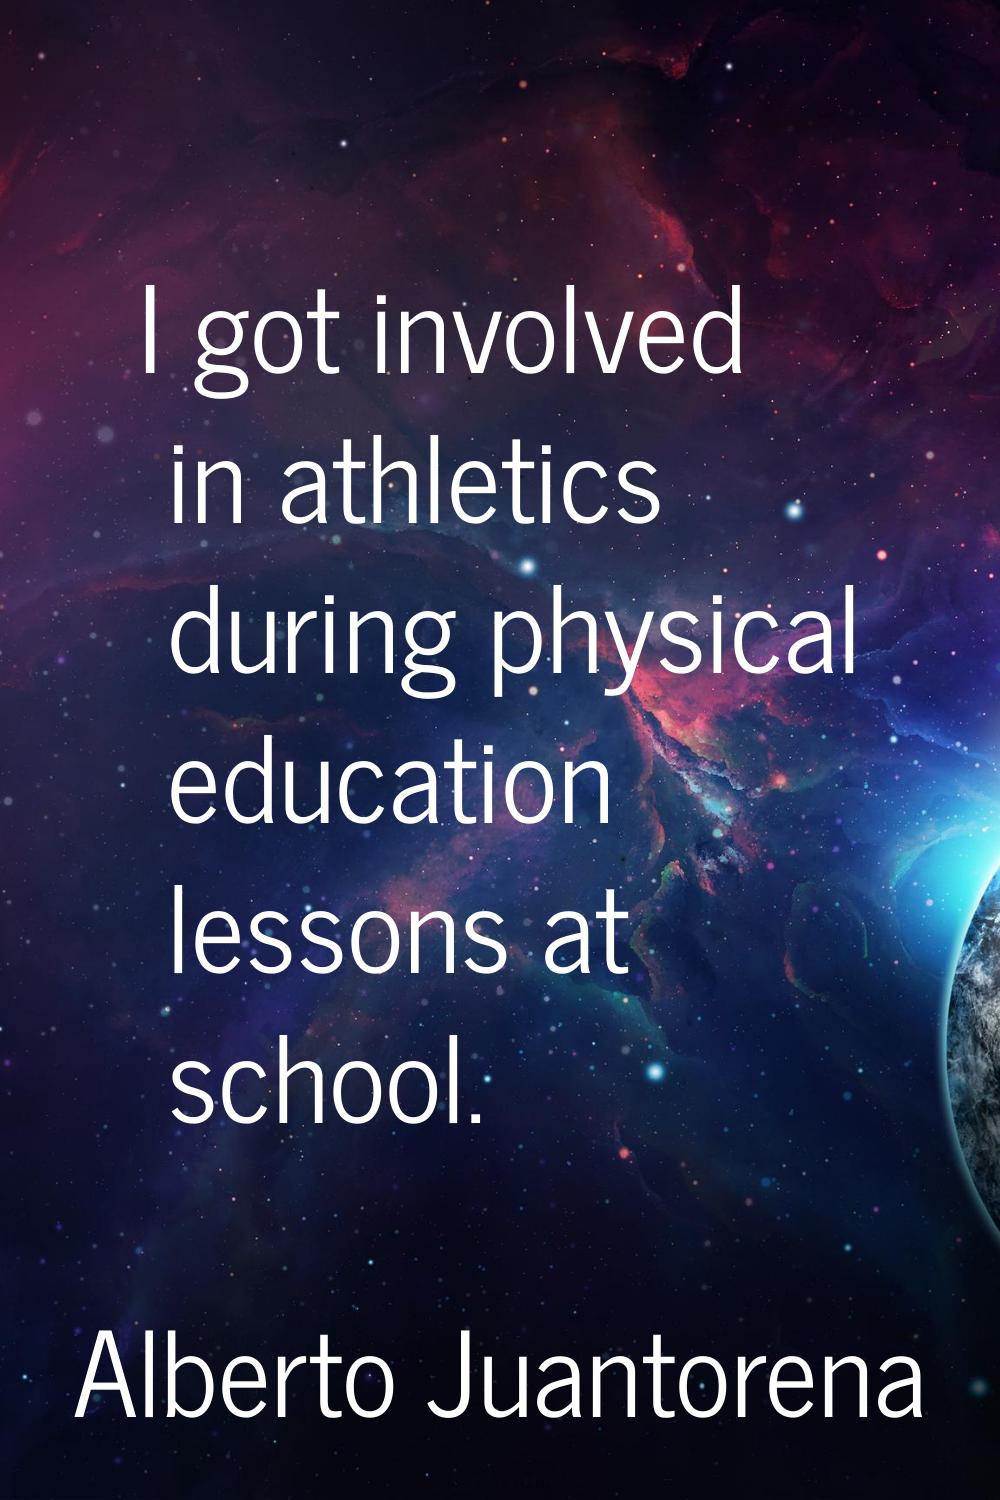 I got involved in athletics during physical education lessons at school.